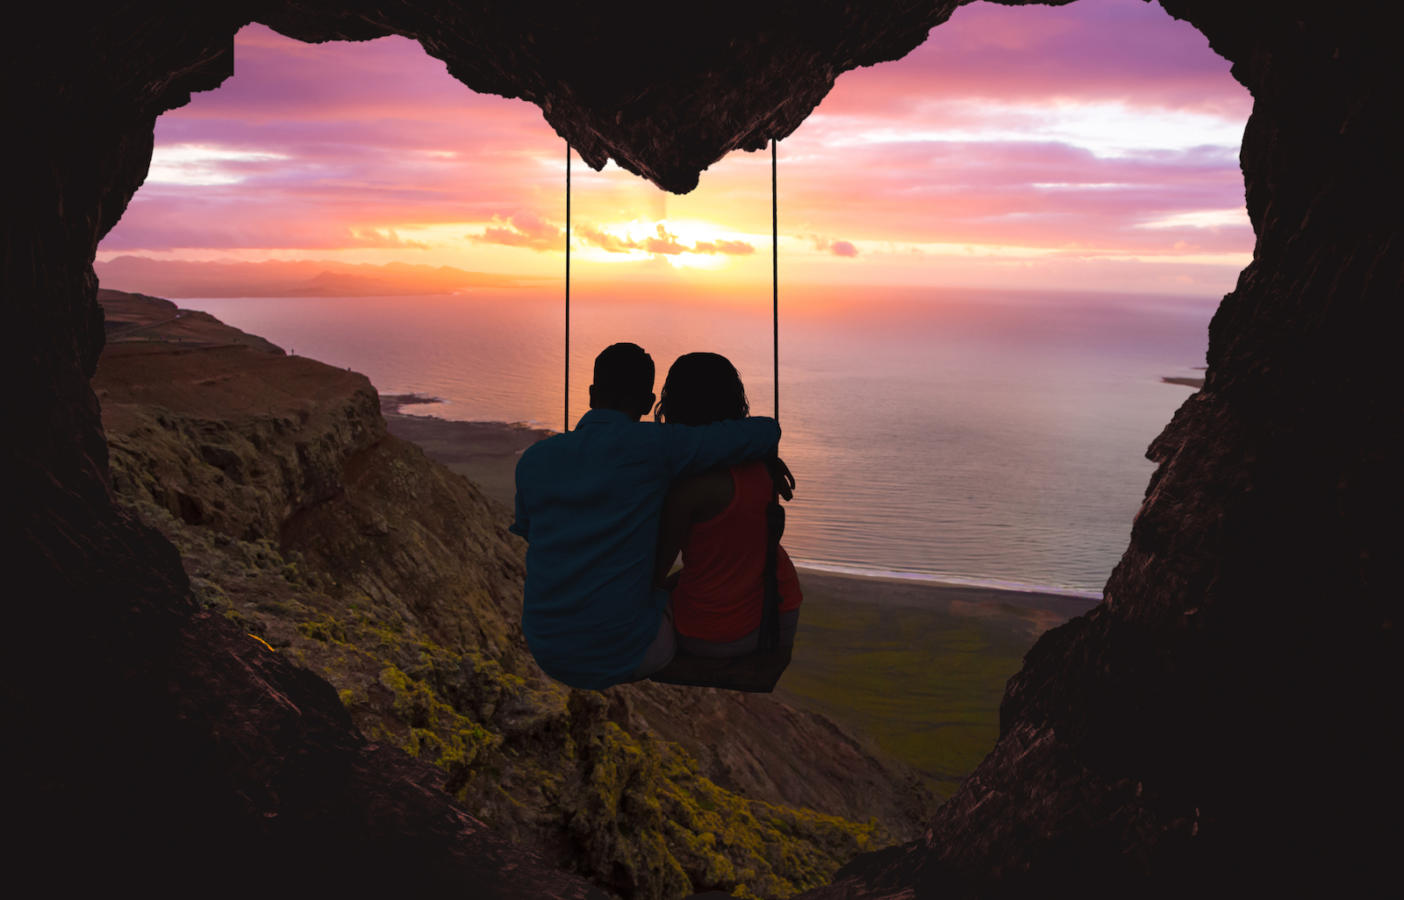 Couple on swing contemplating the sunset over the sea in a romantic view with heart shape.